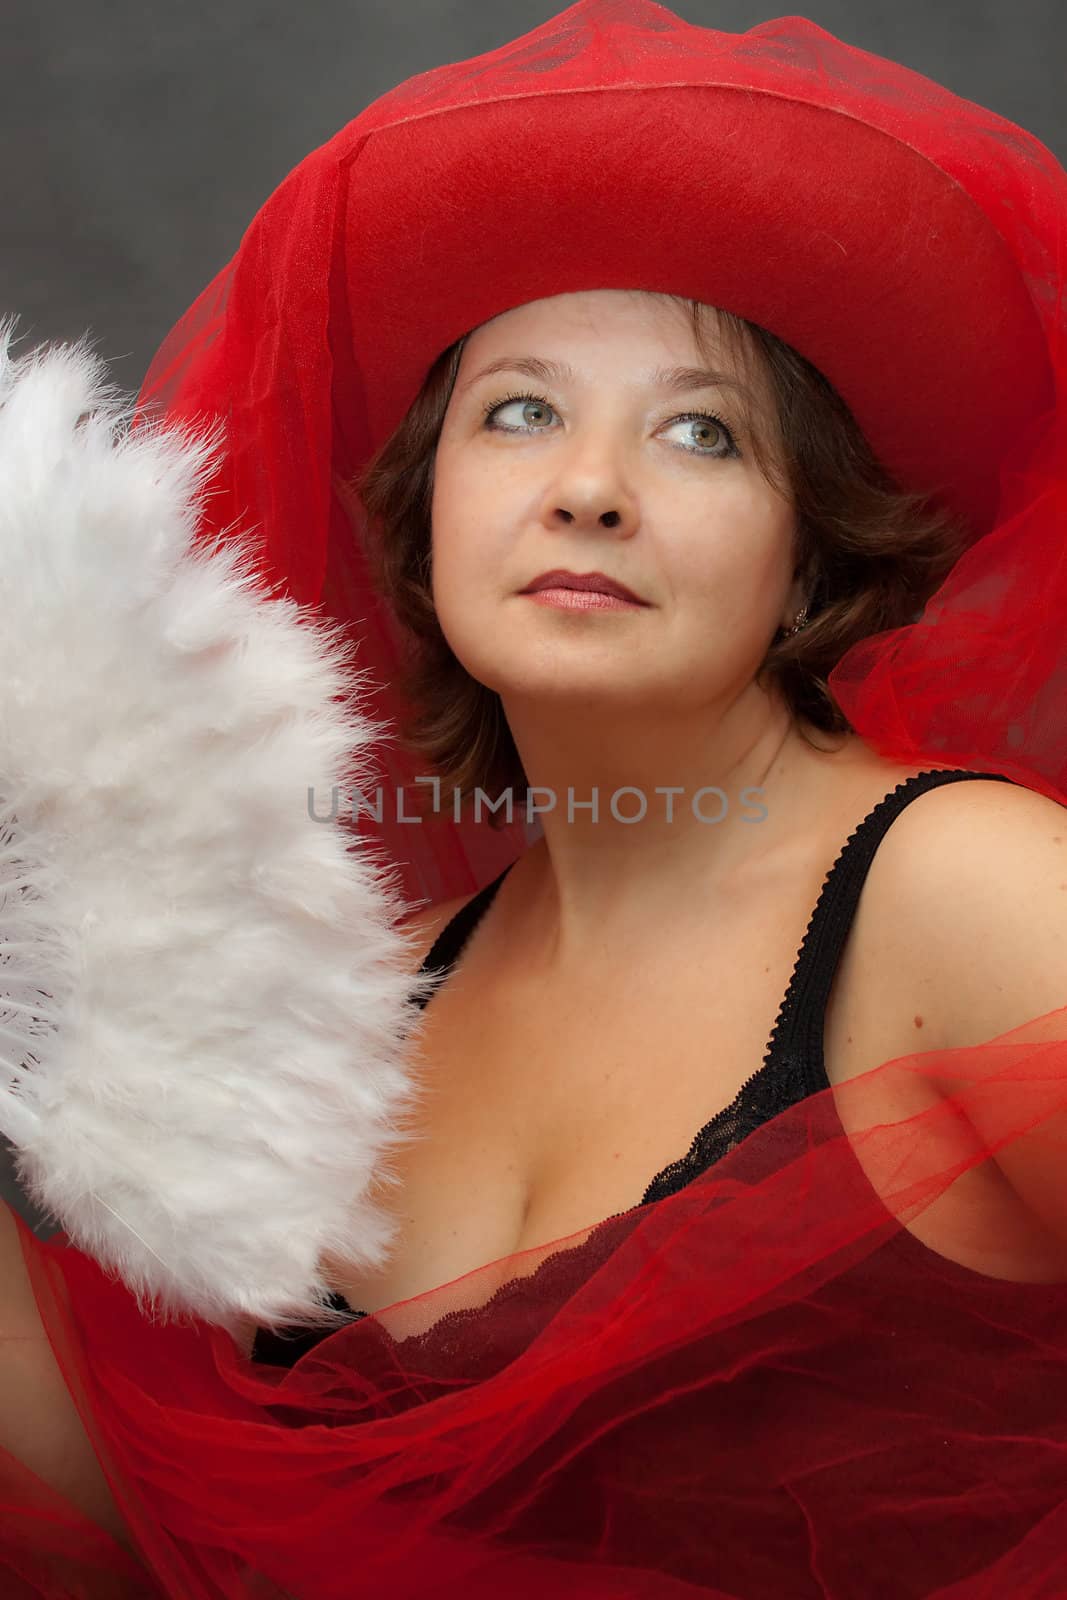 We see Woman in red hat with white fan